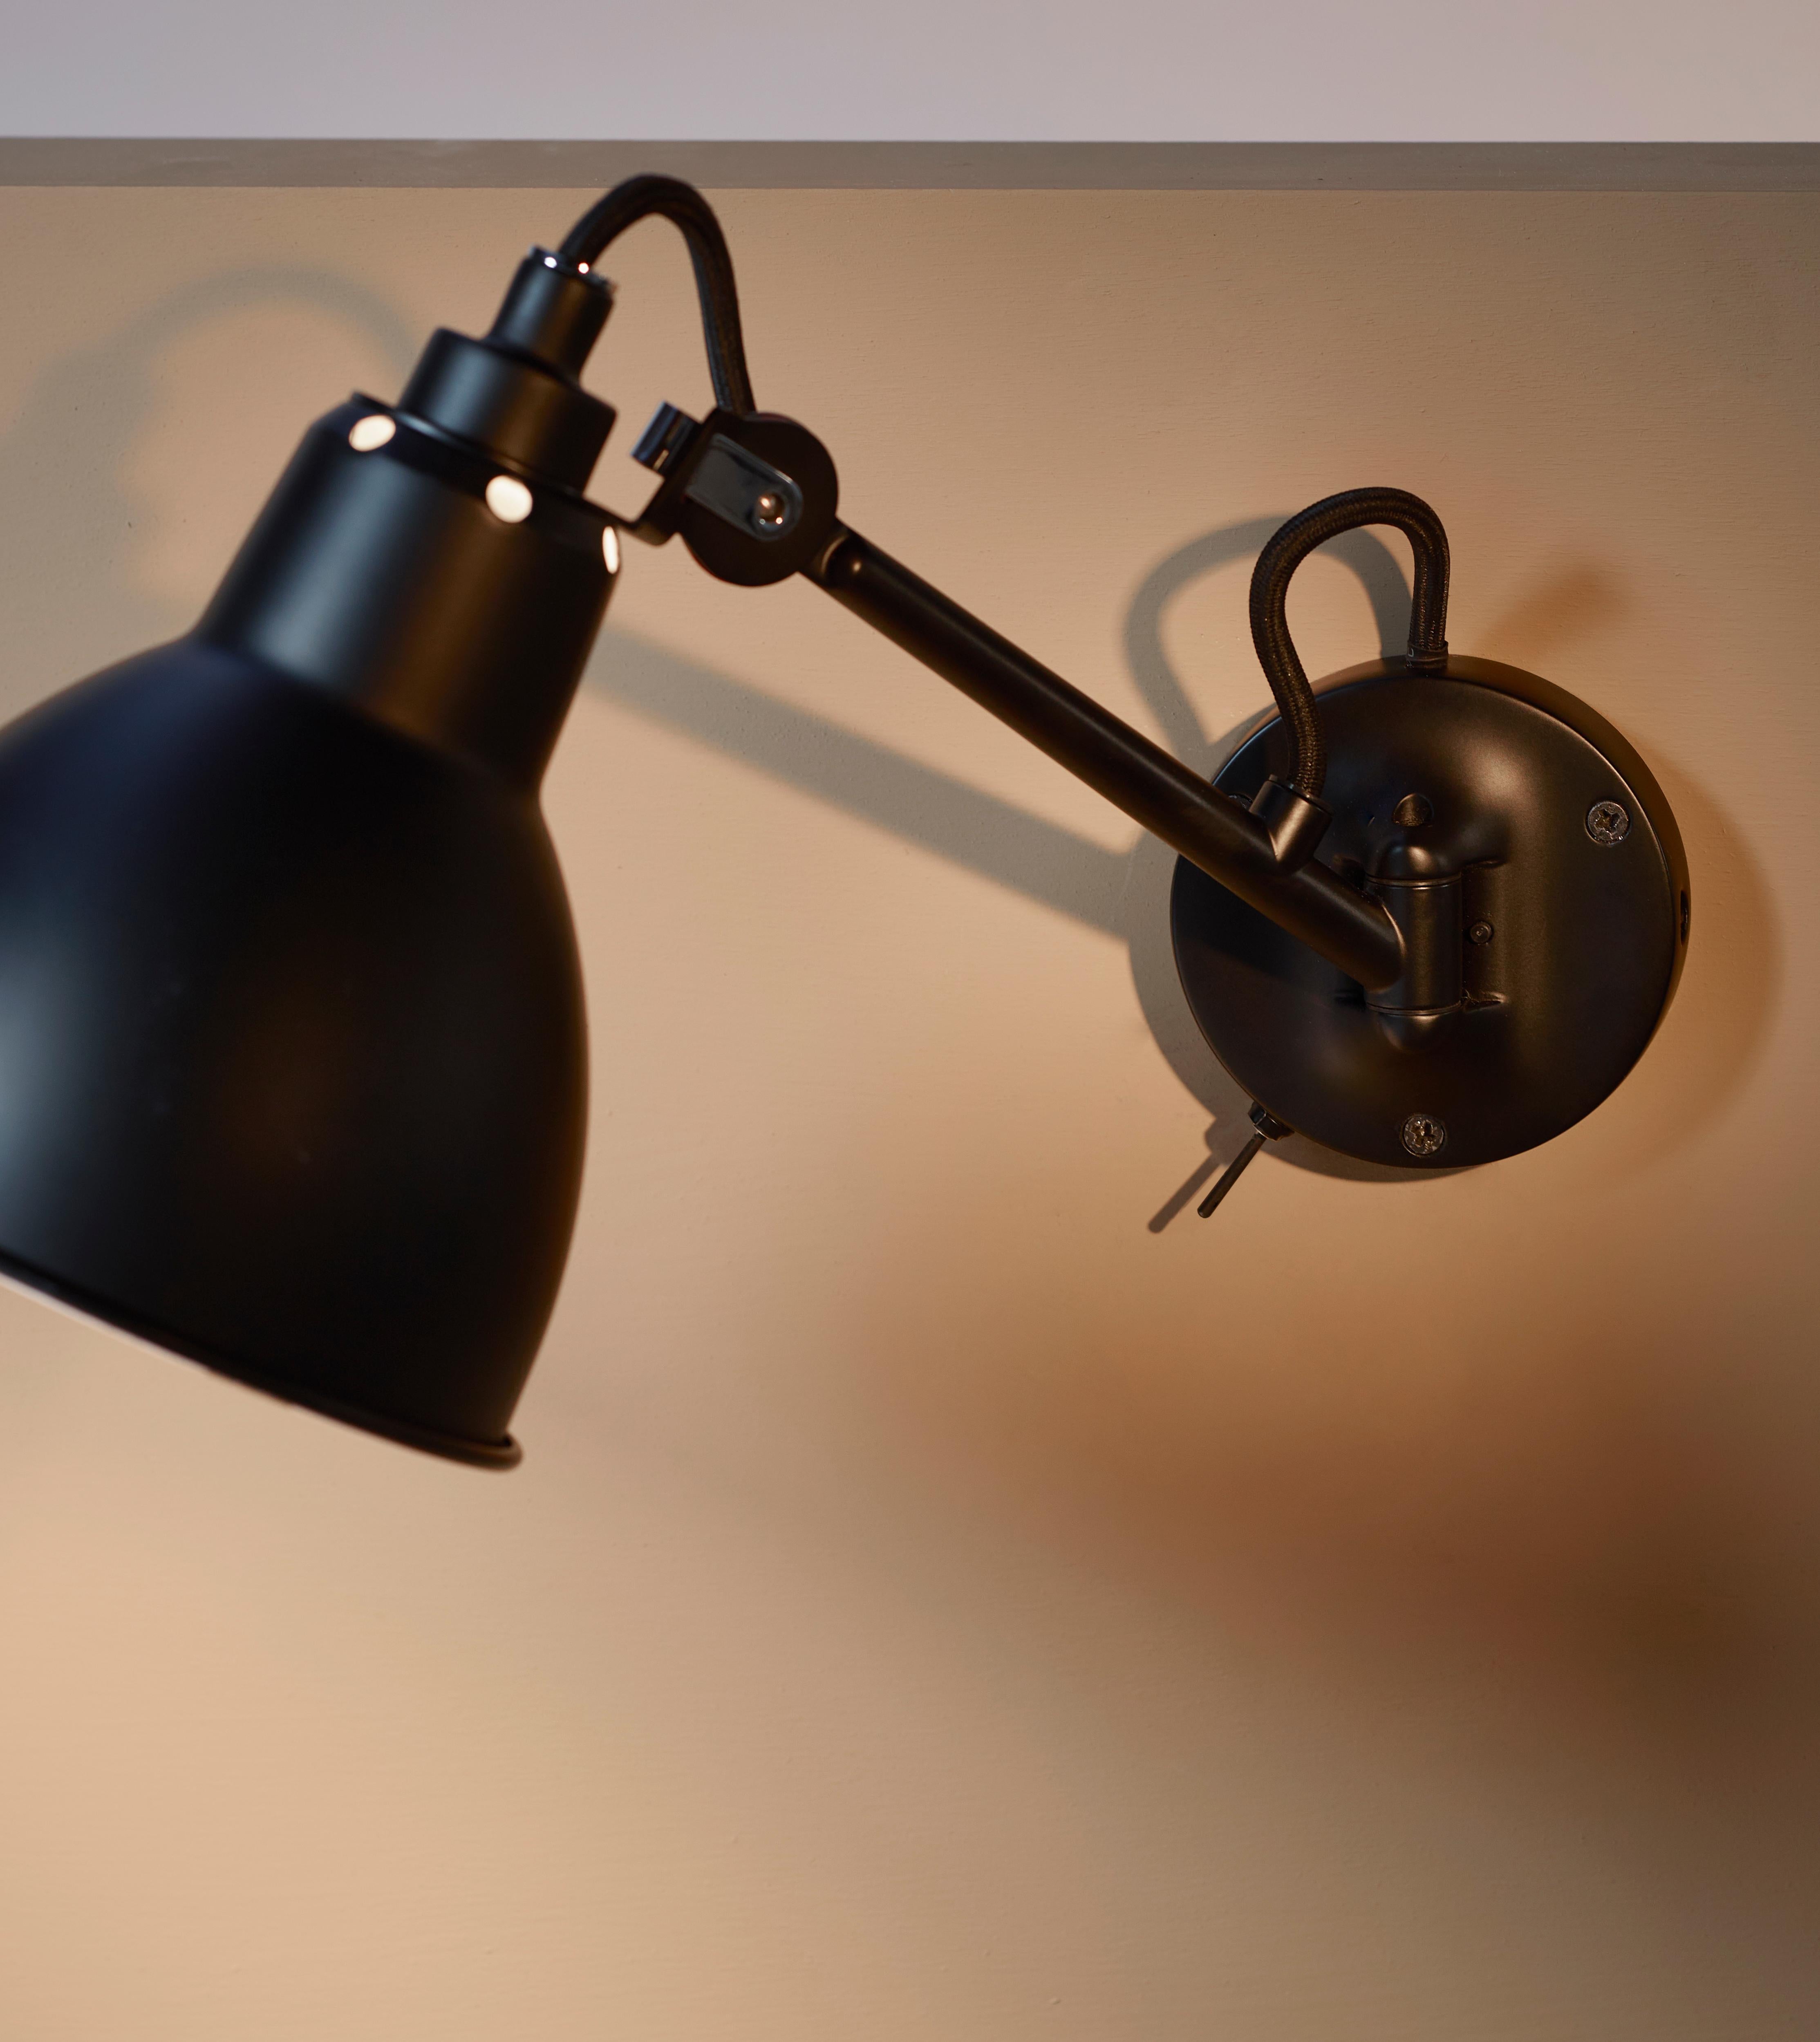 DCW Editions La Lampe Gras N°104 SW Wall Lamp in Black Steel Arm and Blue Shade by Bernard-Albin Gras
 
 In 1921 Bernard-Albin GRAS designed a series of lamps for use in offices and in industrial environments. The GRAS lamp, as it was subsequently